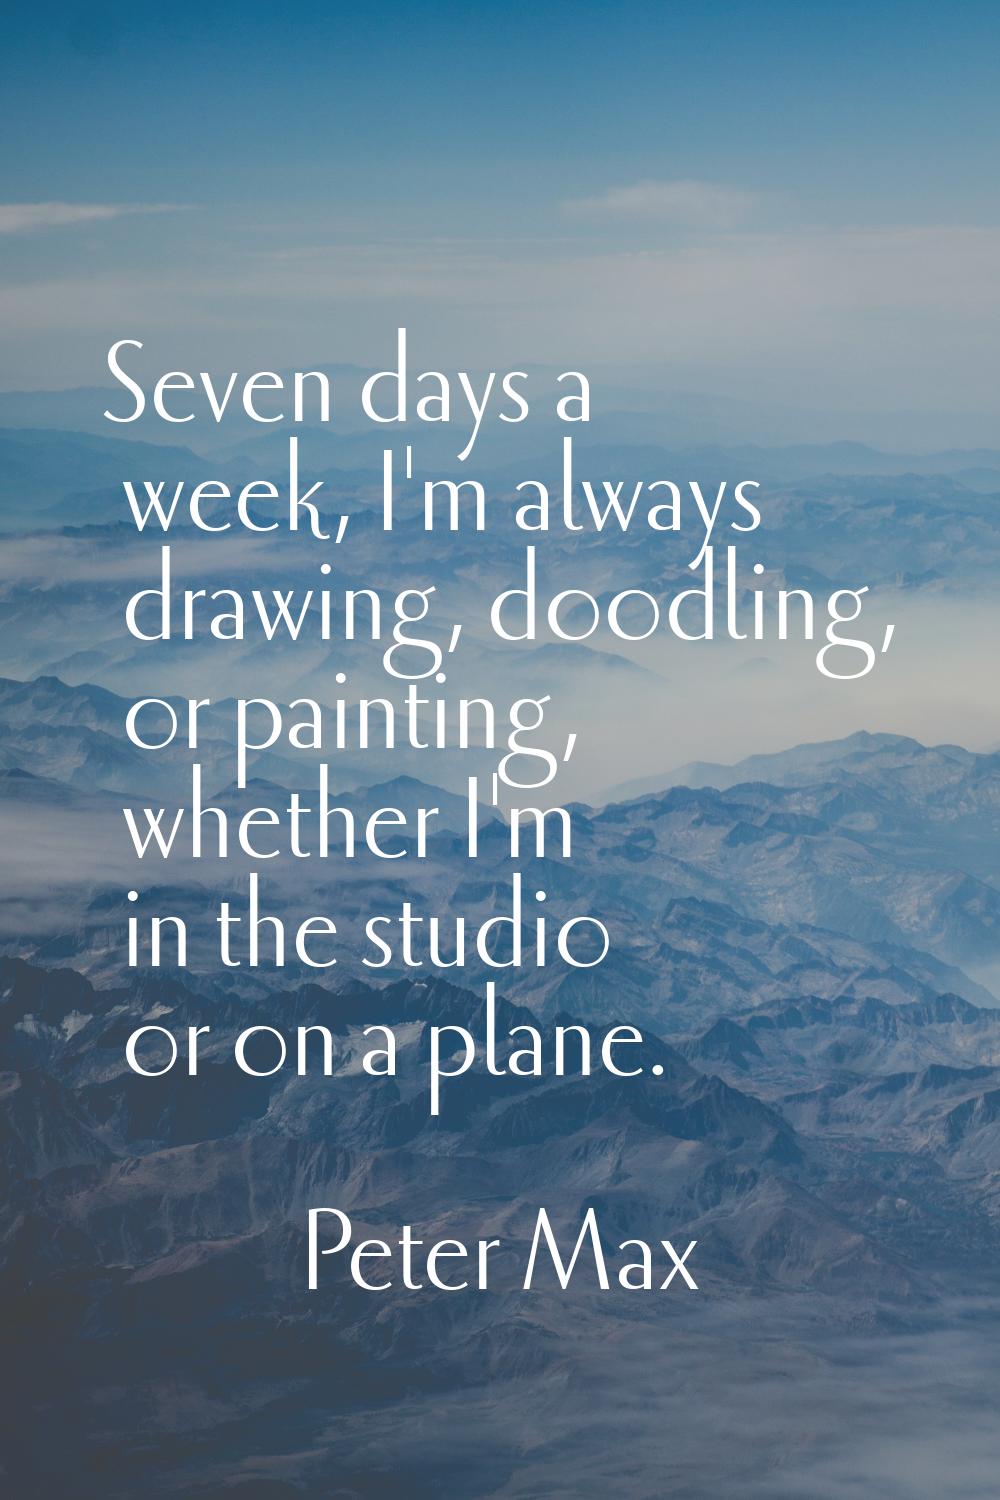 Seven days a week, I'm always drawing, doodling, or painting, whether I'm in the studio or on a pla